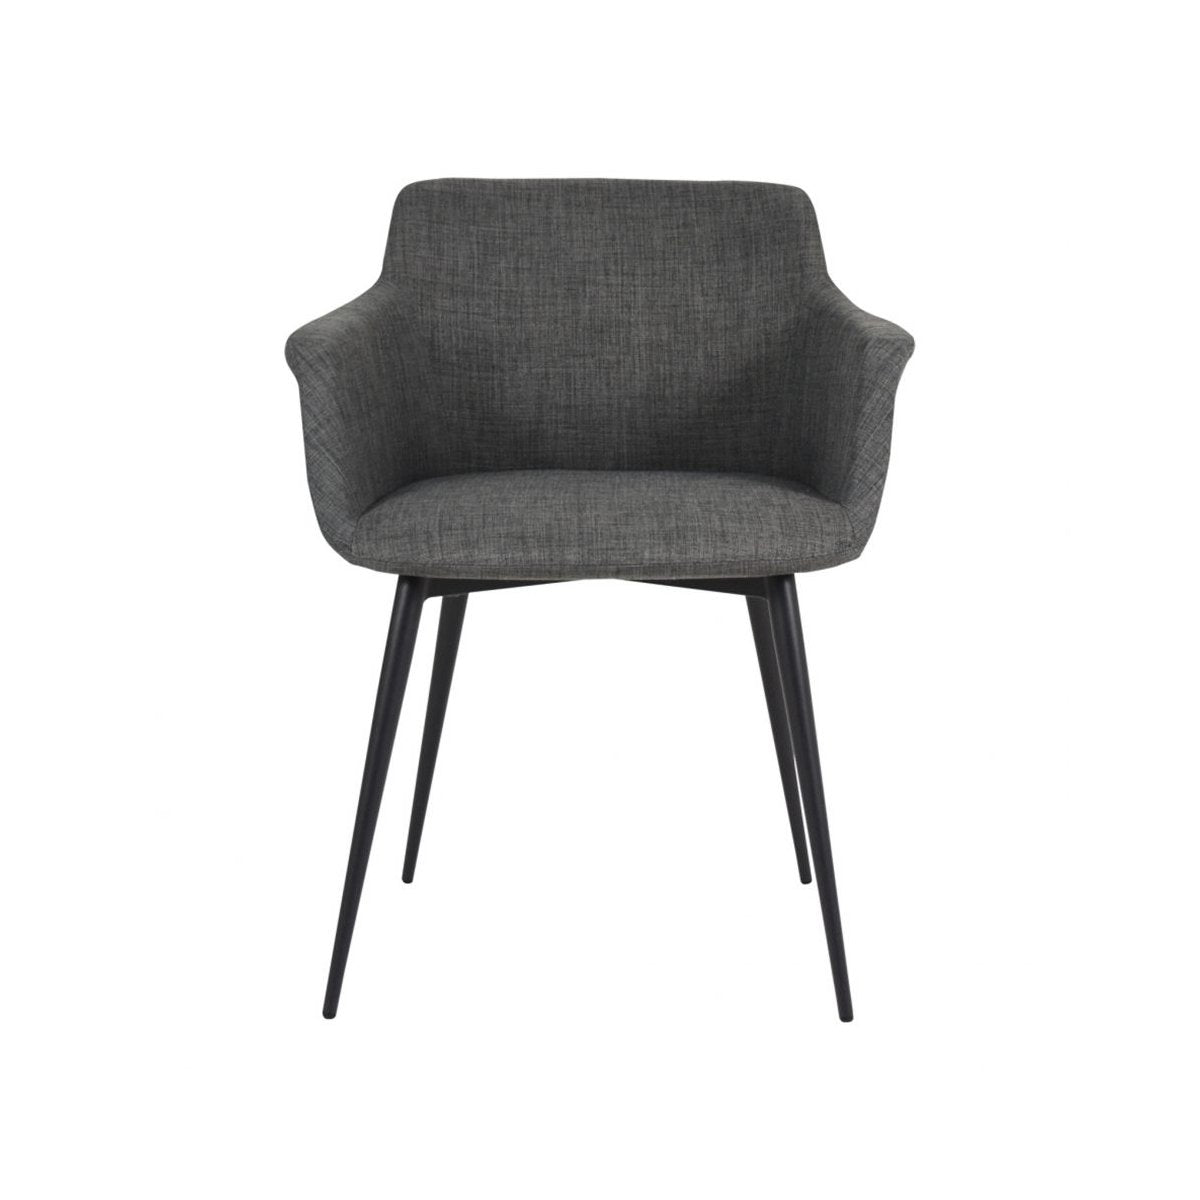 Load image into Gallery viewer, Ronda Arm Chair-M2 Dining Chairs Moe&amp;#39;s     Four Hands, Burke Decor, Mid Century Modern Furniture, Old Bones Furniture Company, Old Bones Co, Modern Mid Century, Designer Furniture, https://www.oldbonesco.com/
